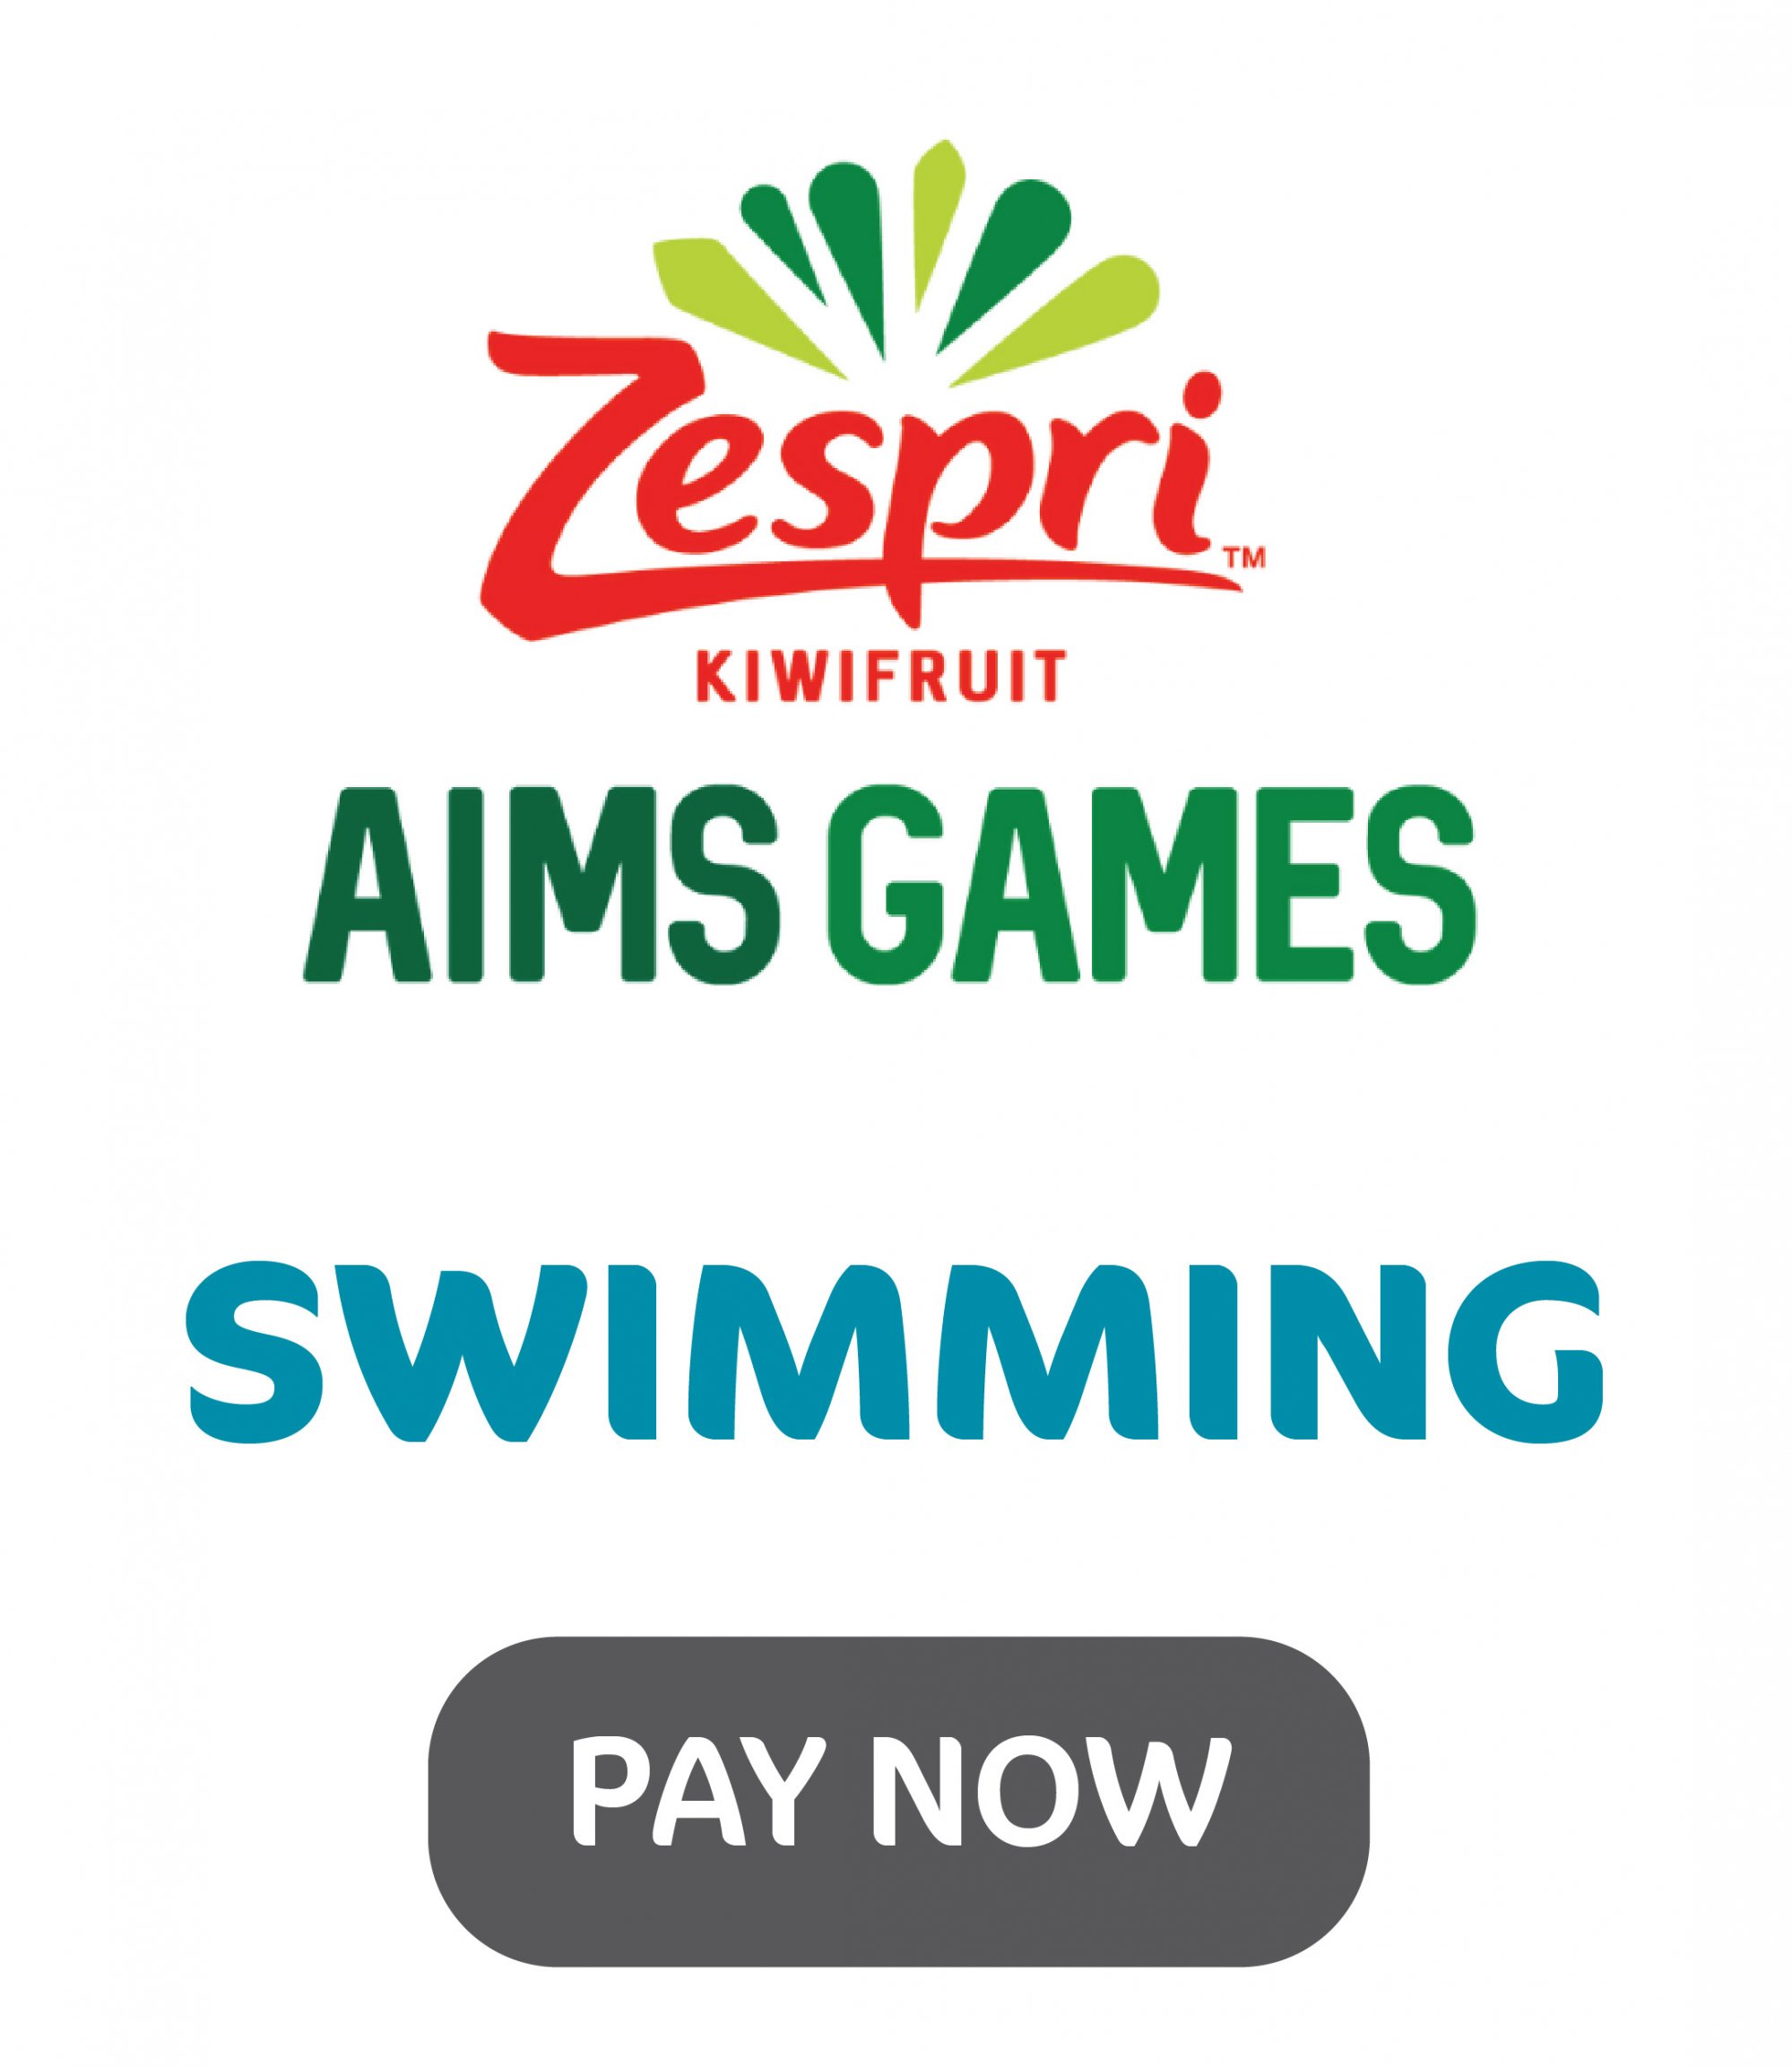 Aims Games icons_Swimming.jpg